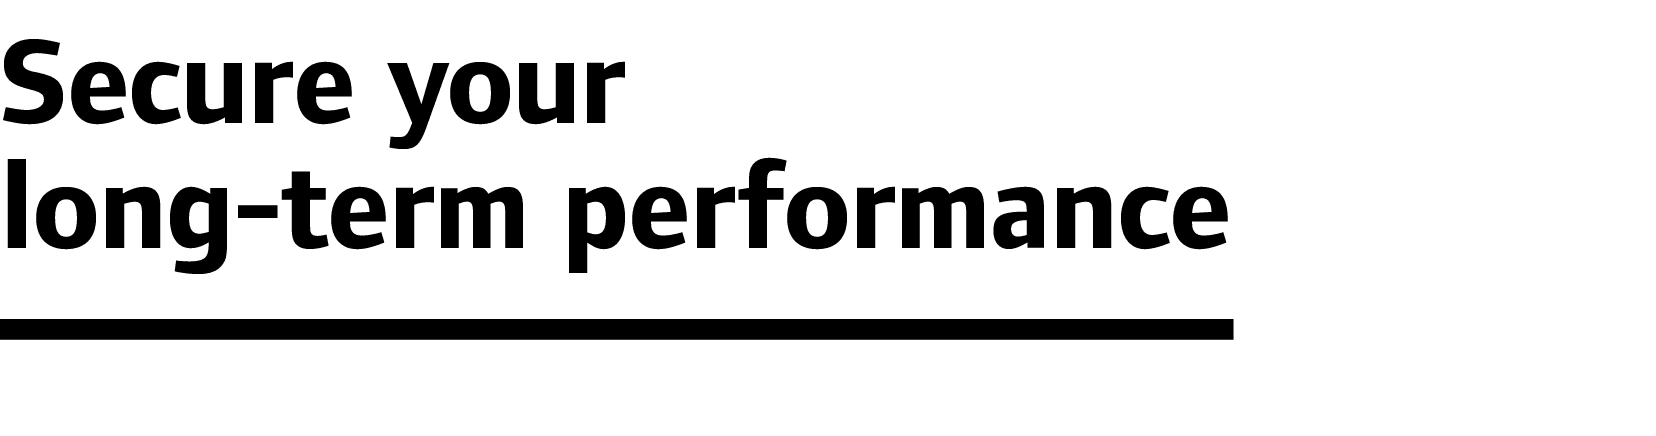 Secure your long-term performance